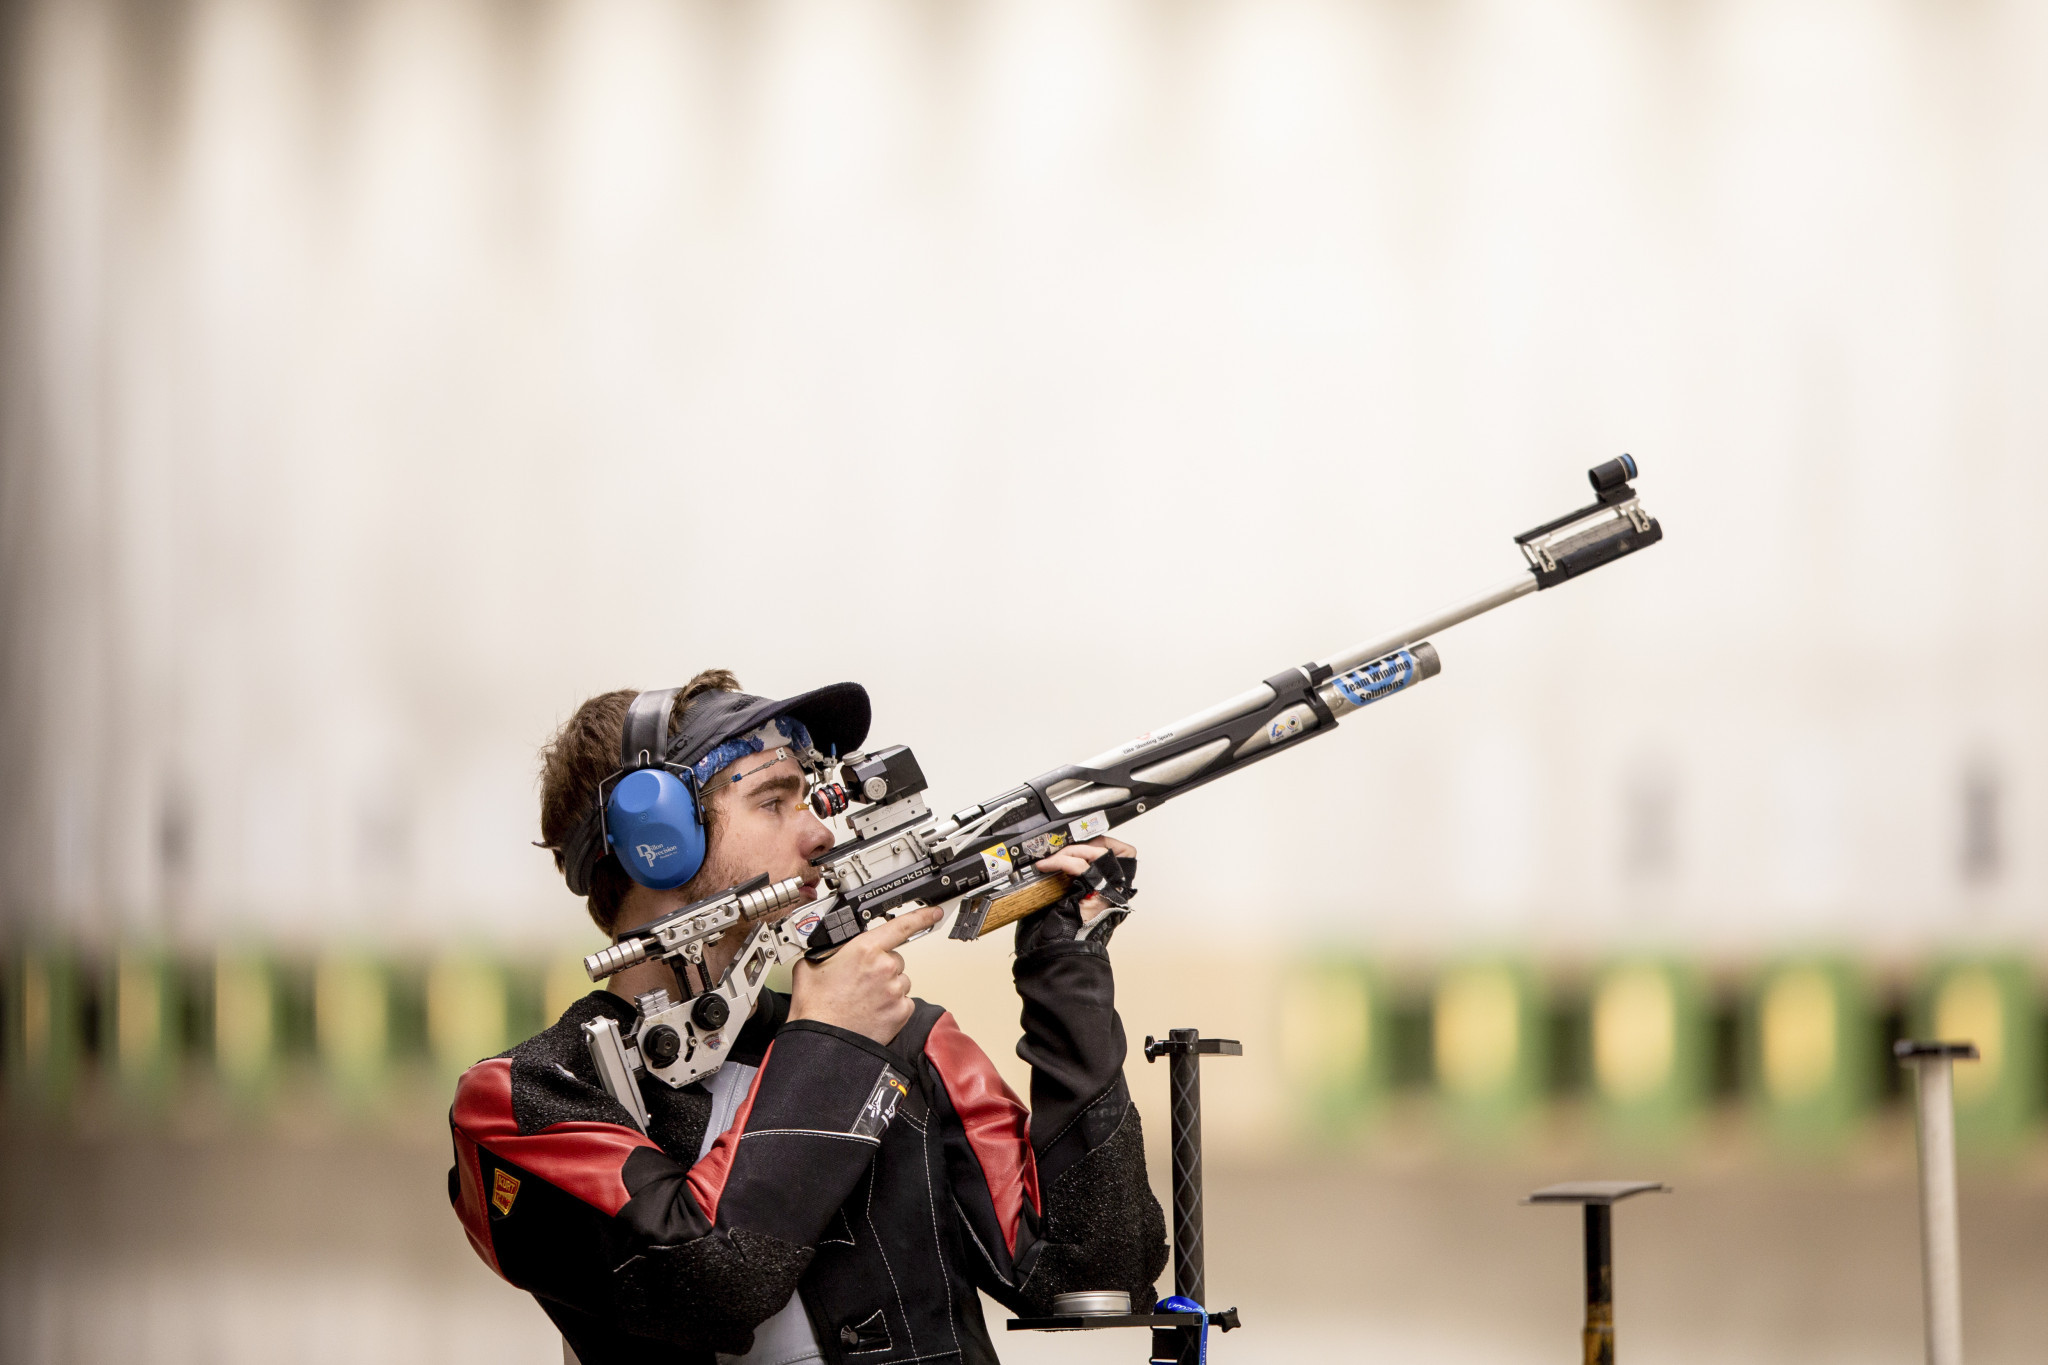 The US enjoyed further success in the men's 10 metre air rifle, which was won by Lucas Kozeniesky ©Lima 2019